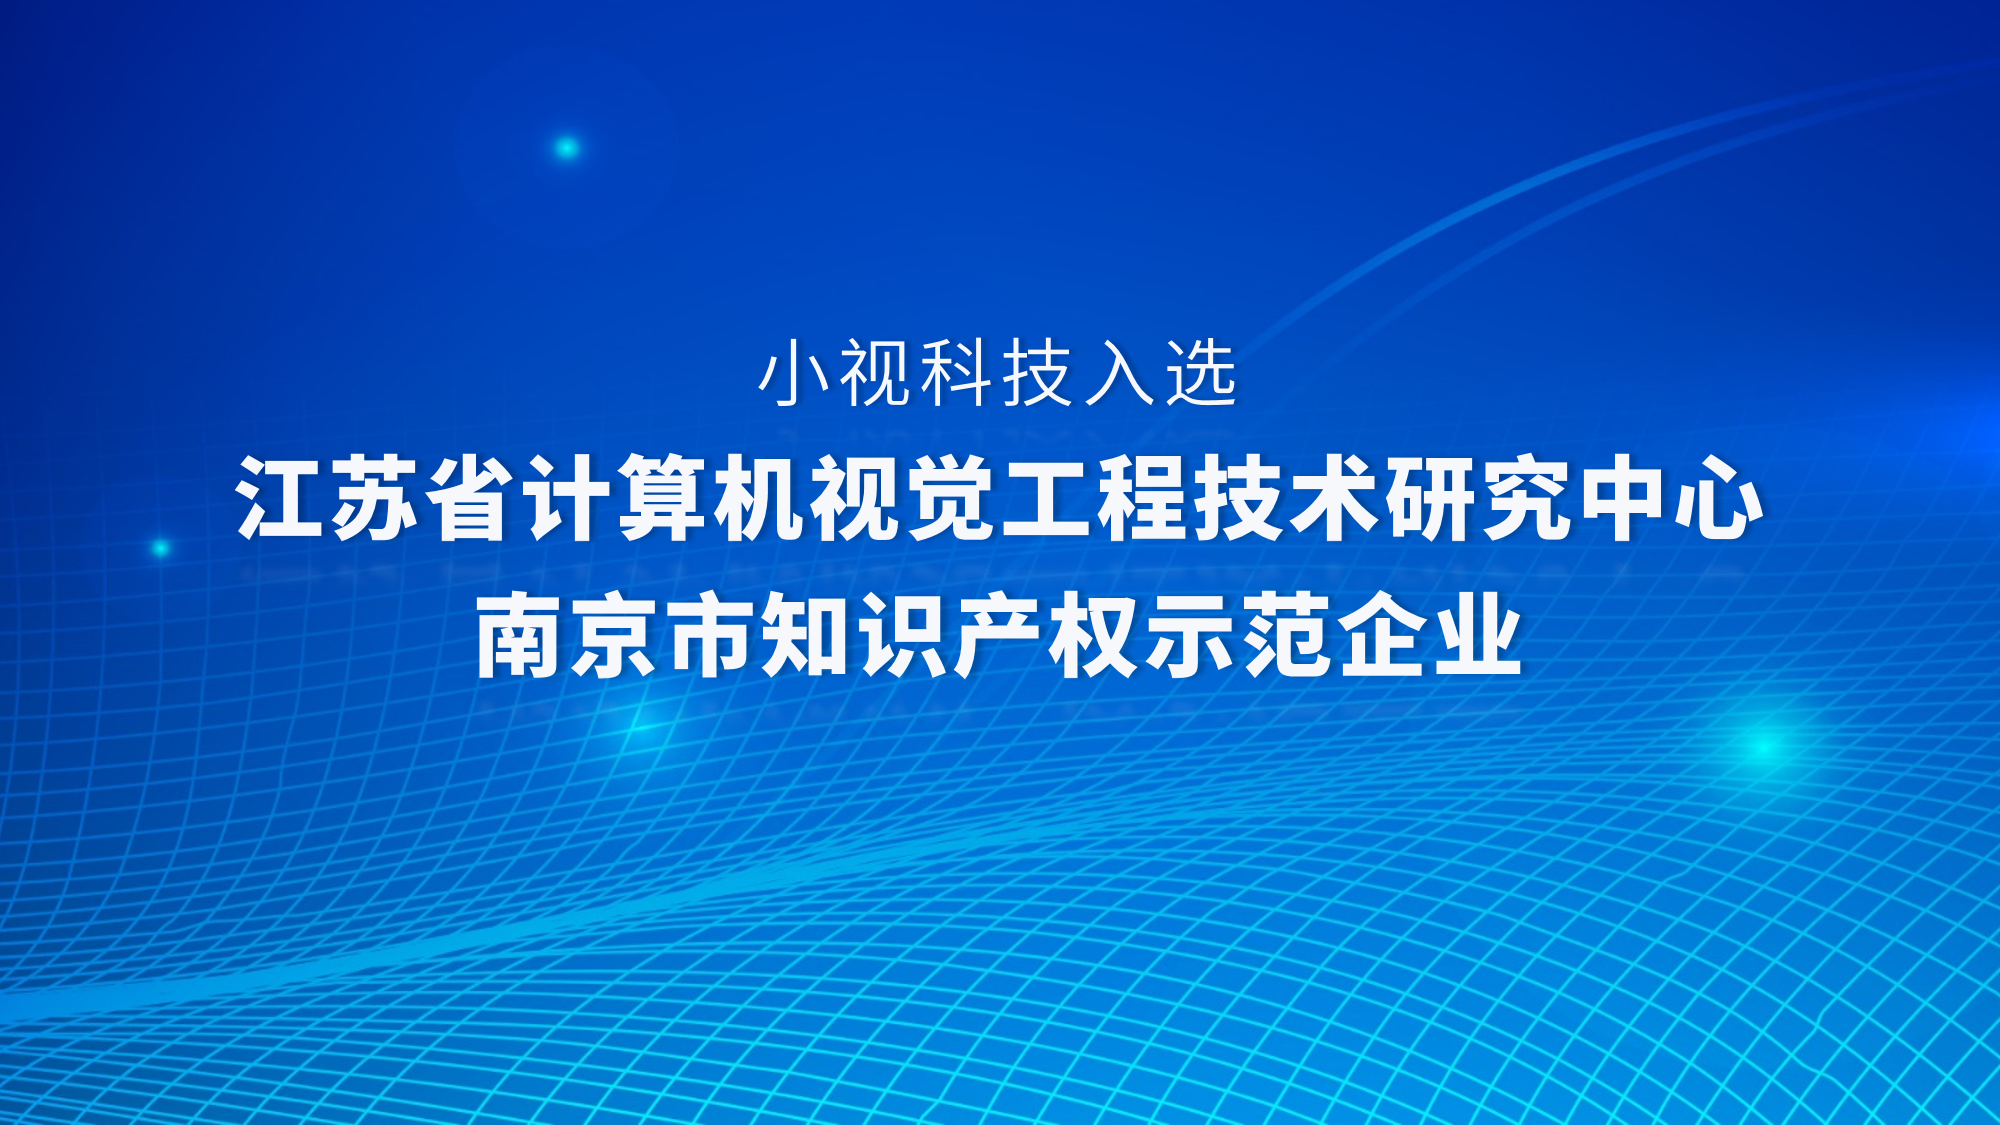 Minivision awarded the Jiangsu Computer Vision Engineering Technology Research Center and selected as the "Nanjing Intellectual Property Demonstration Enterprise" Minivision